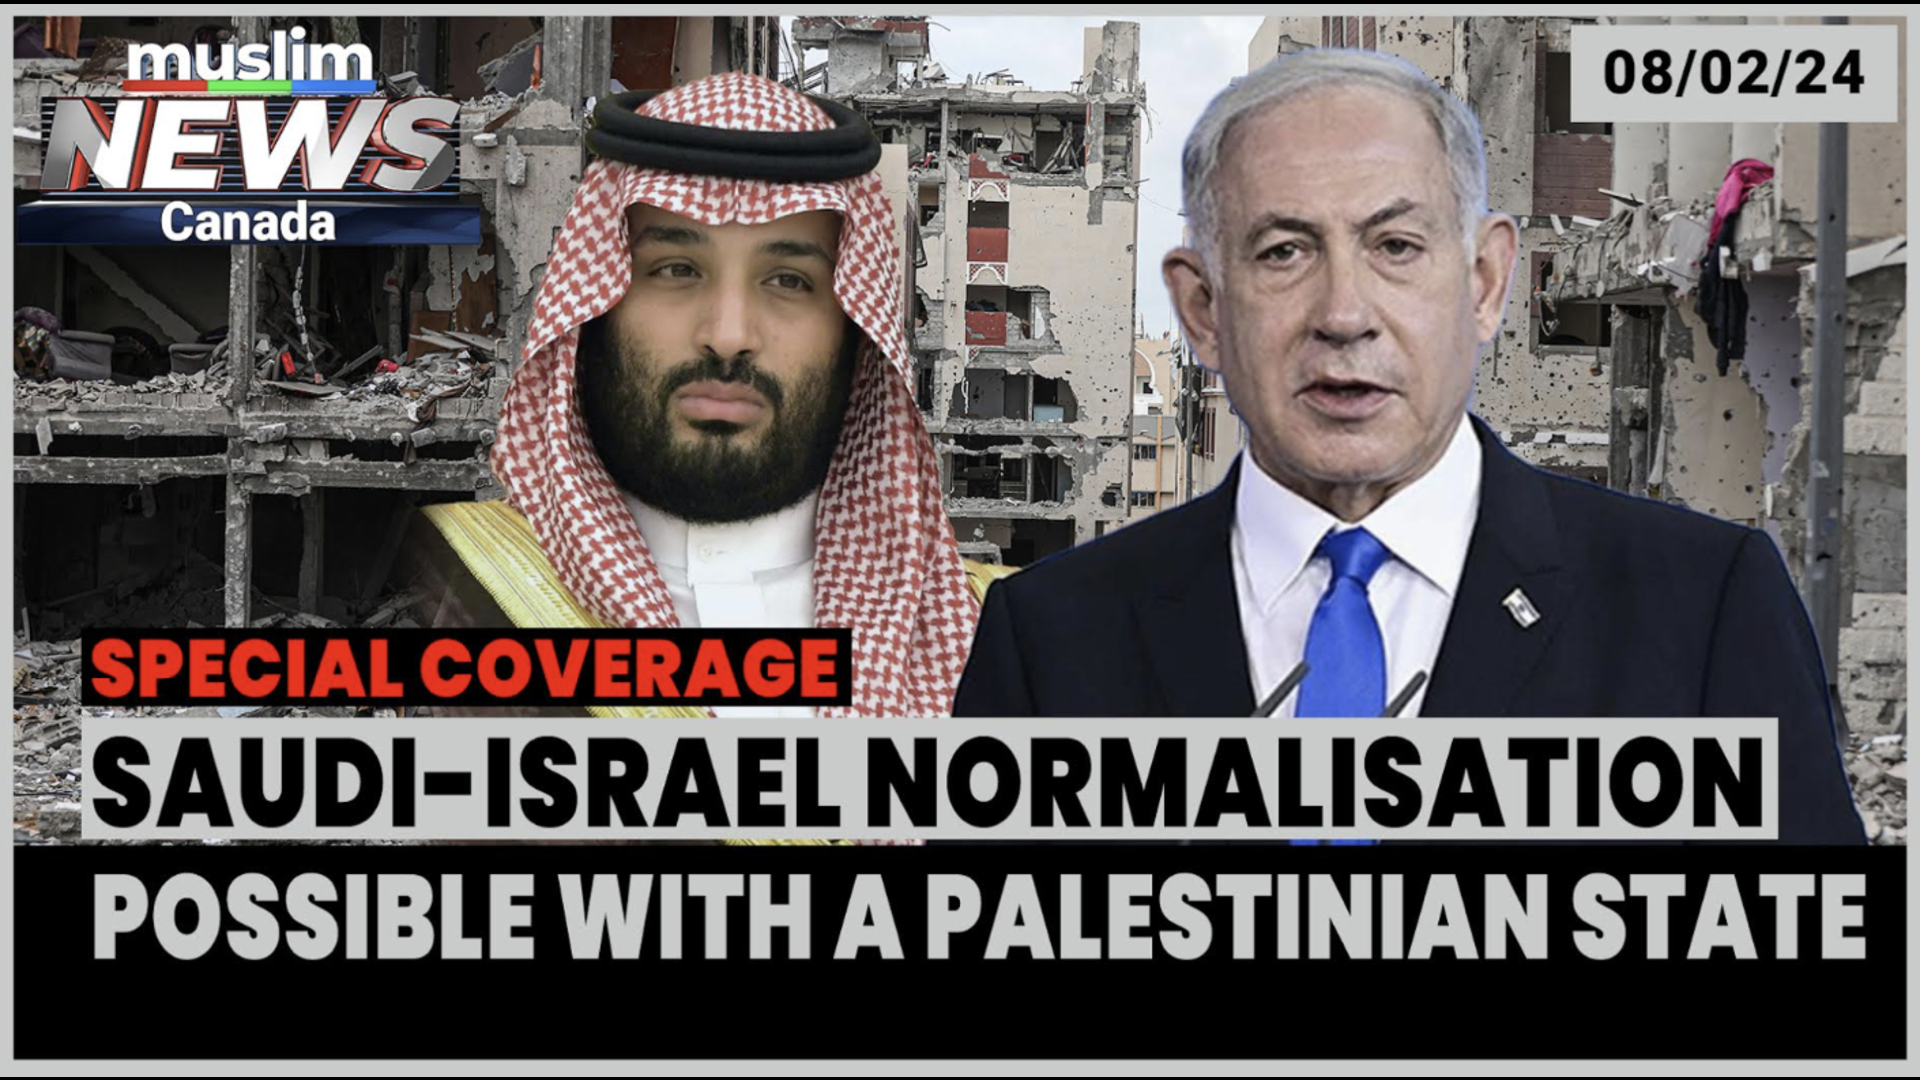 Saudi Arabia says Normalization with Israel not Possible Without Palestinian State | Feb 08, 2024